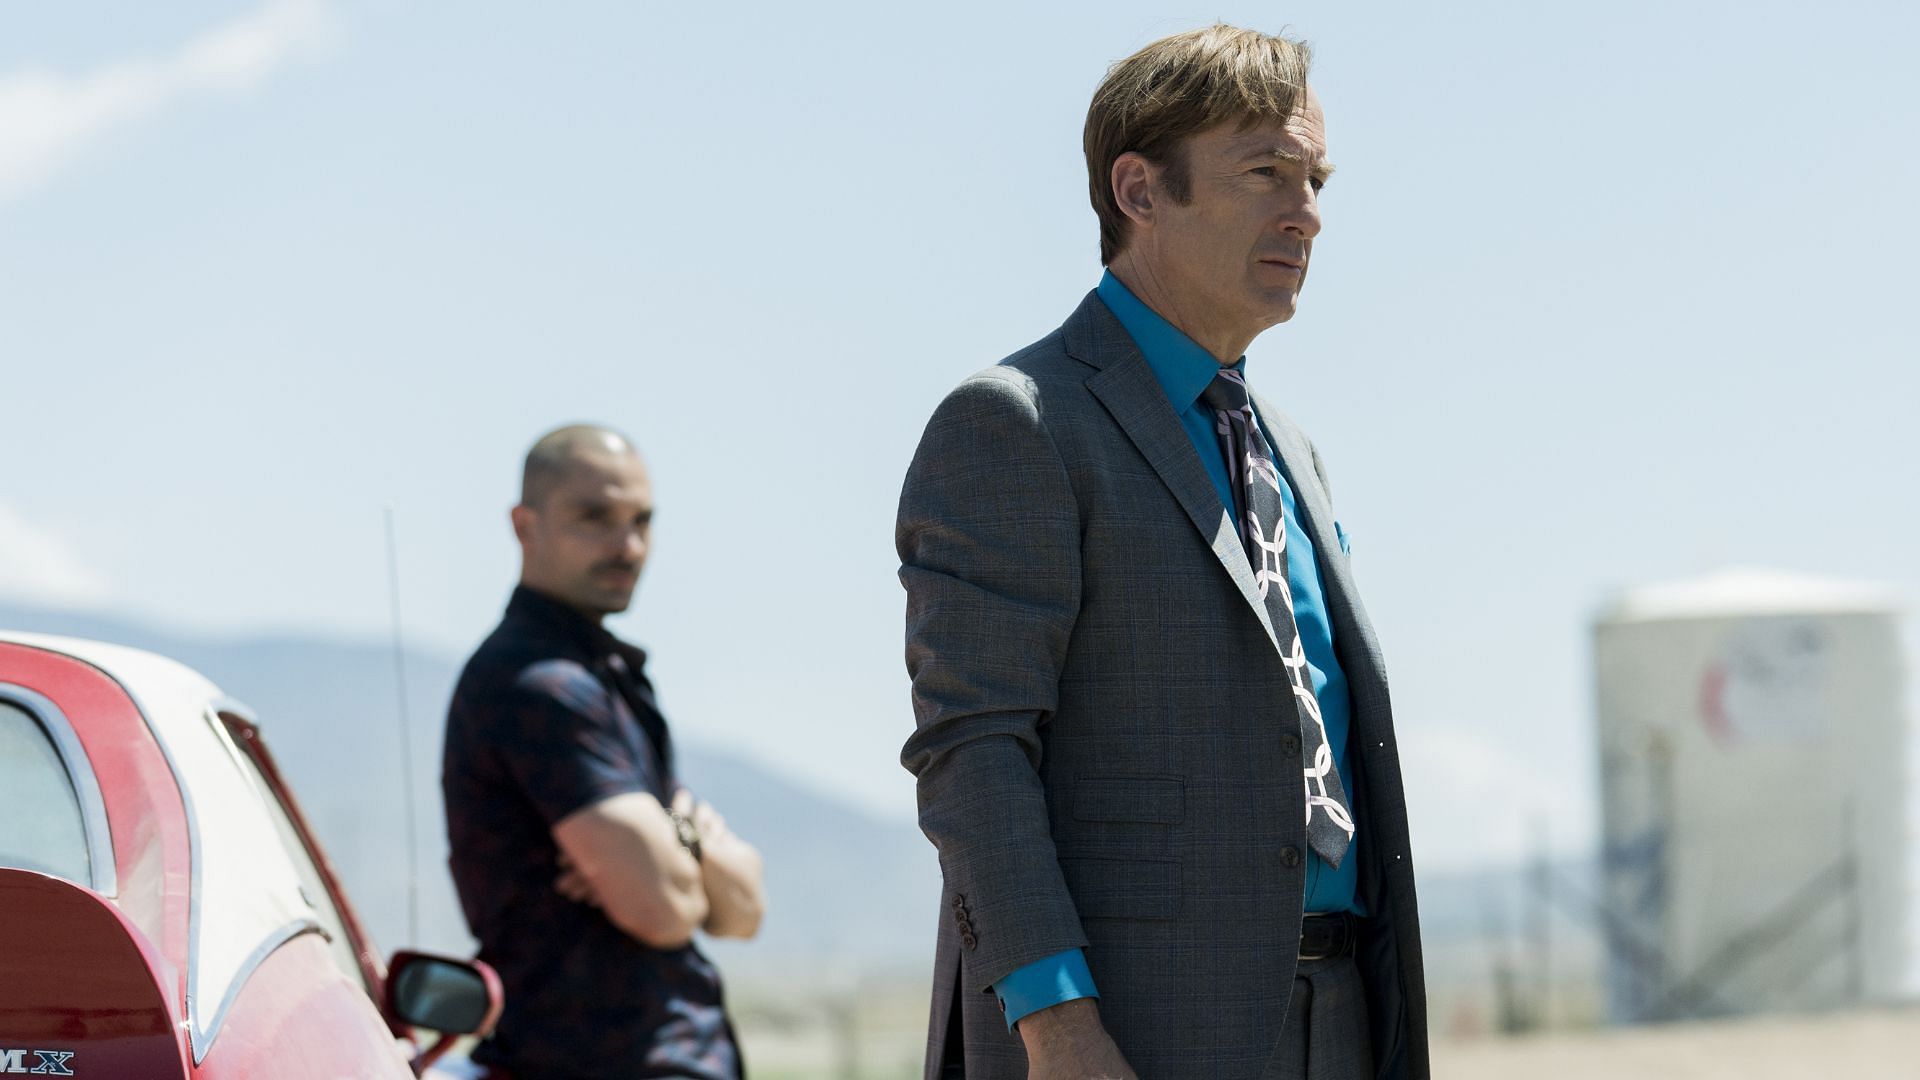 Better Call Saul': Kim Wexler's Wardrobe Could Hint at Dismal Fate for  Jimmy McGill in Season 6